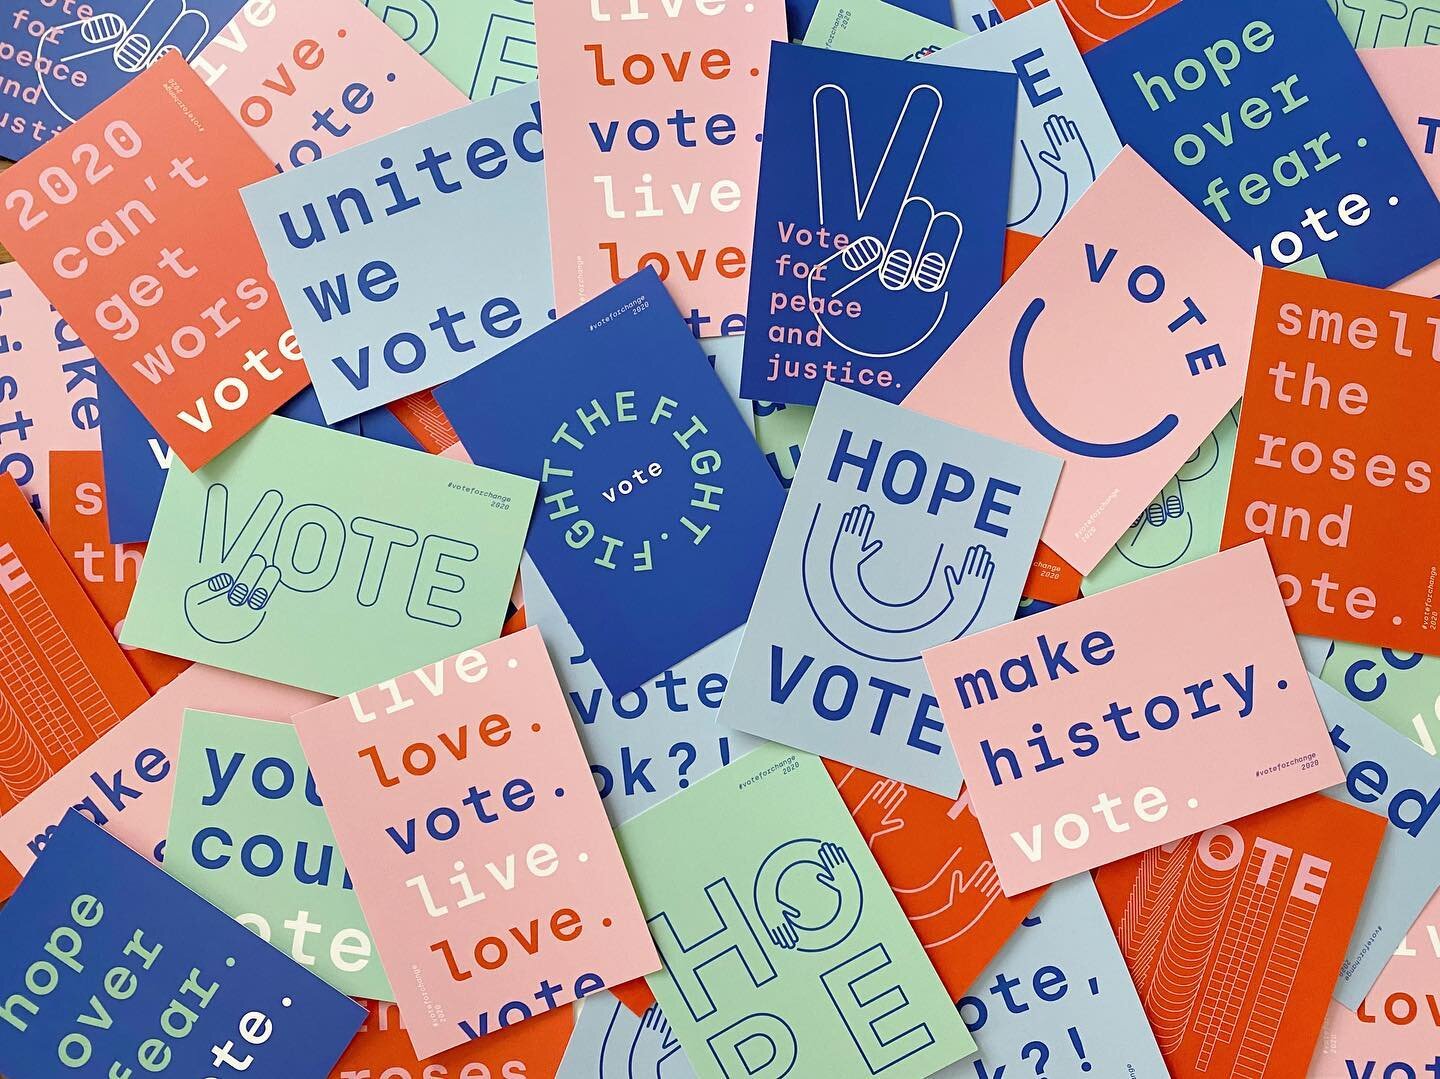 Created these to get the word out. Register to vote! I&rsquo;ll be sending these, posting them, and handing them out. Let&rsquo;s do this friends, only 2 months until the election. #voteforchange #vote2020 #getoutthevote #hope #yourvotematters #plany